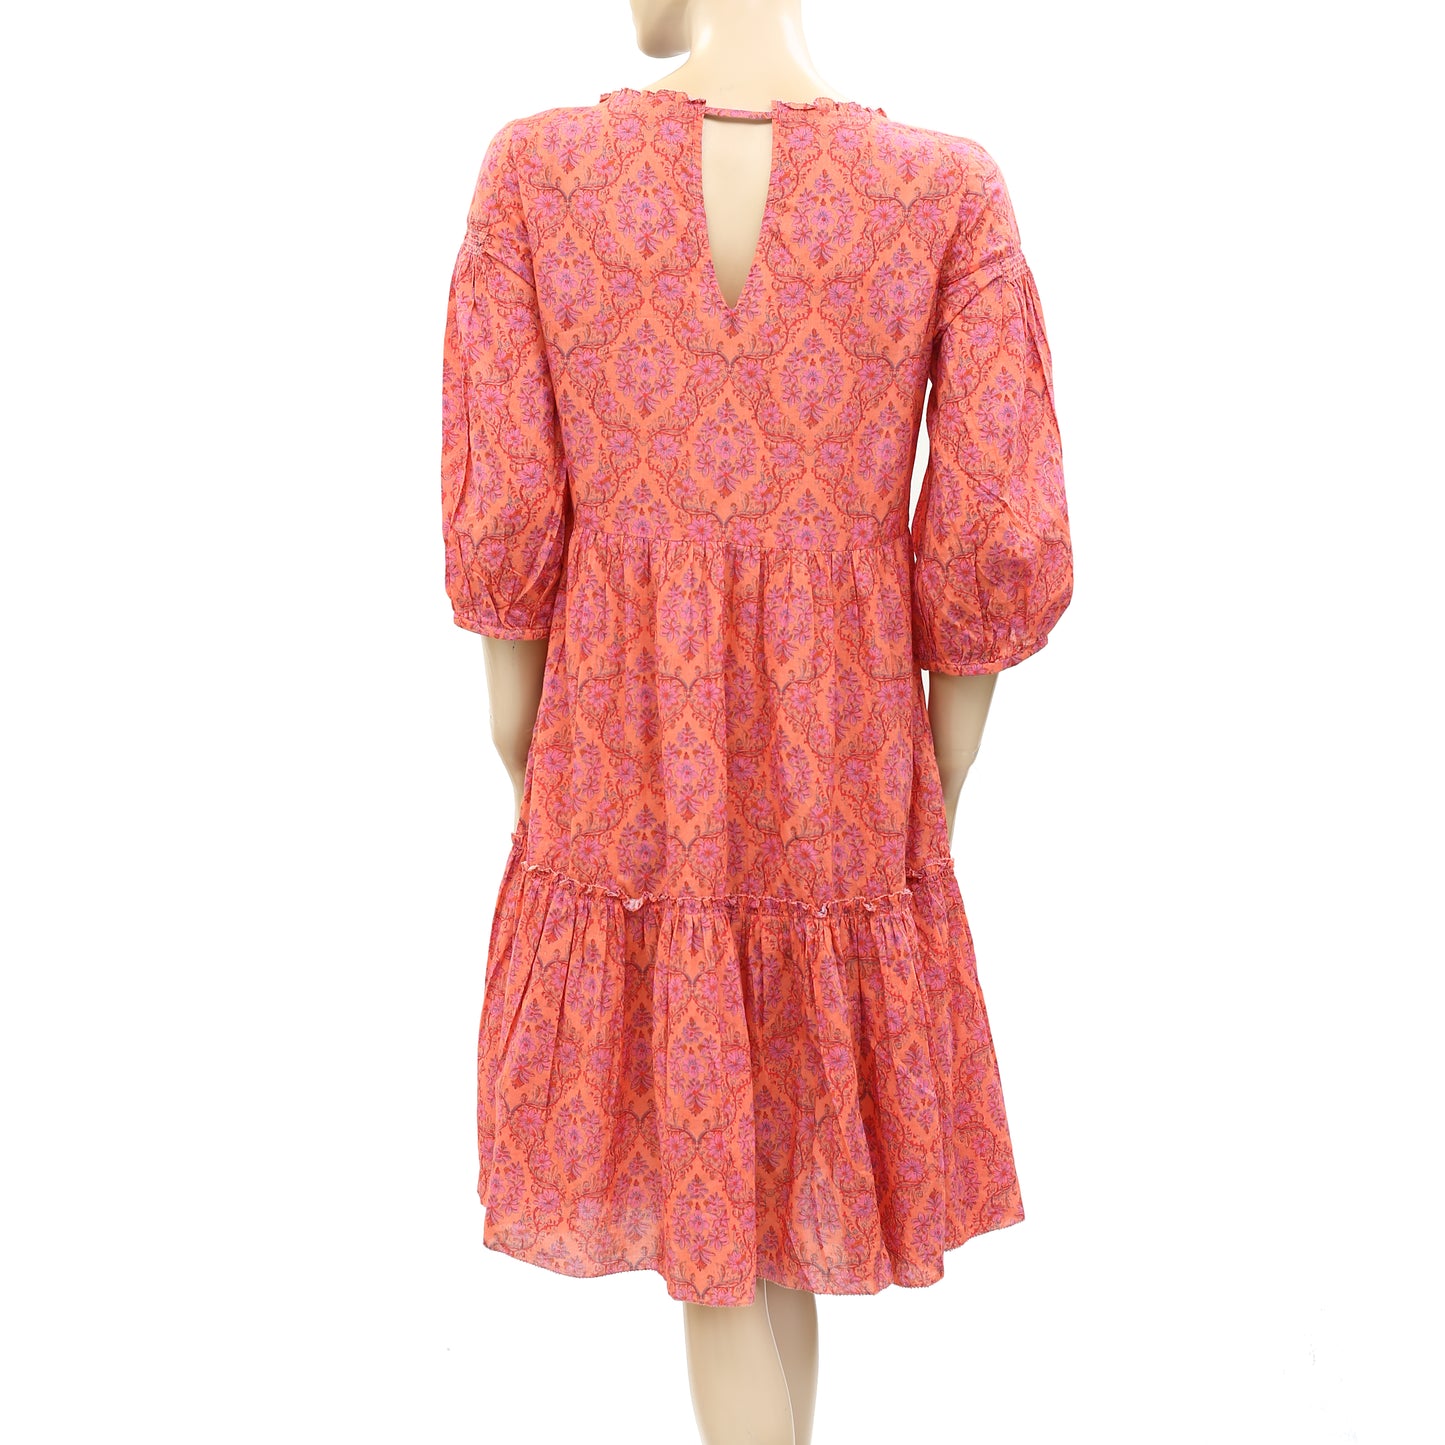 Odd Molly Anthropologie Floral Printed Dress